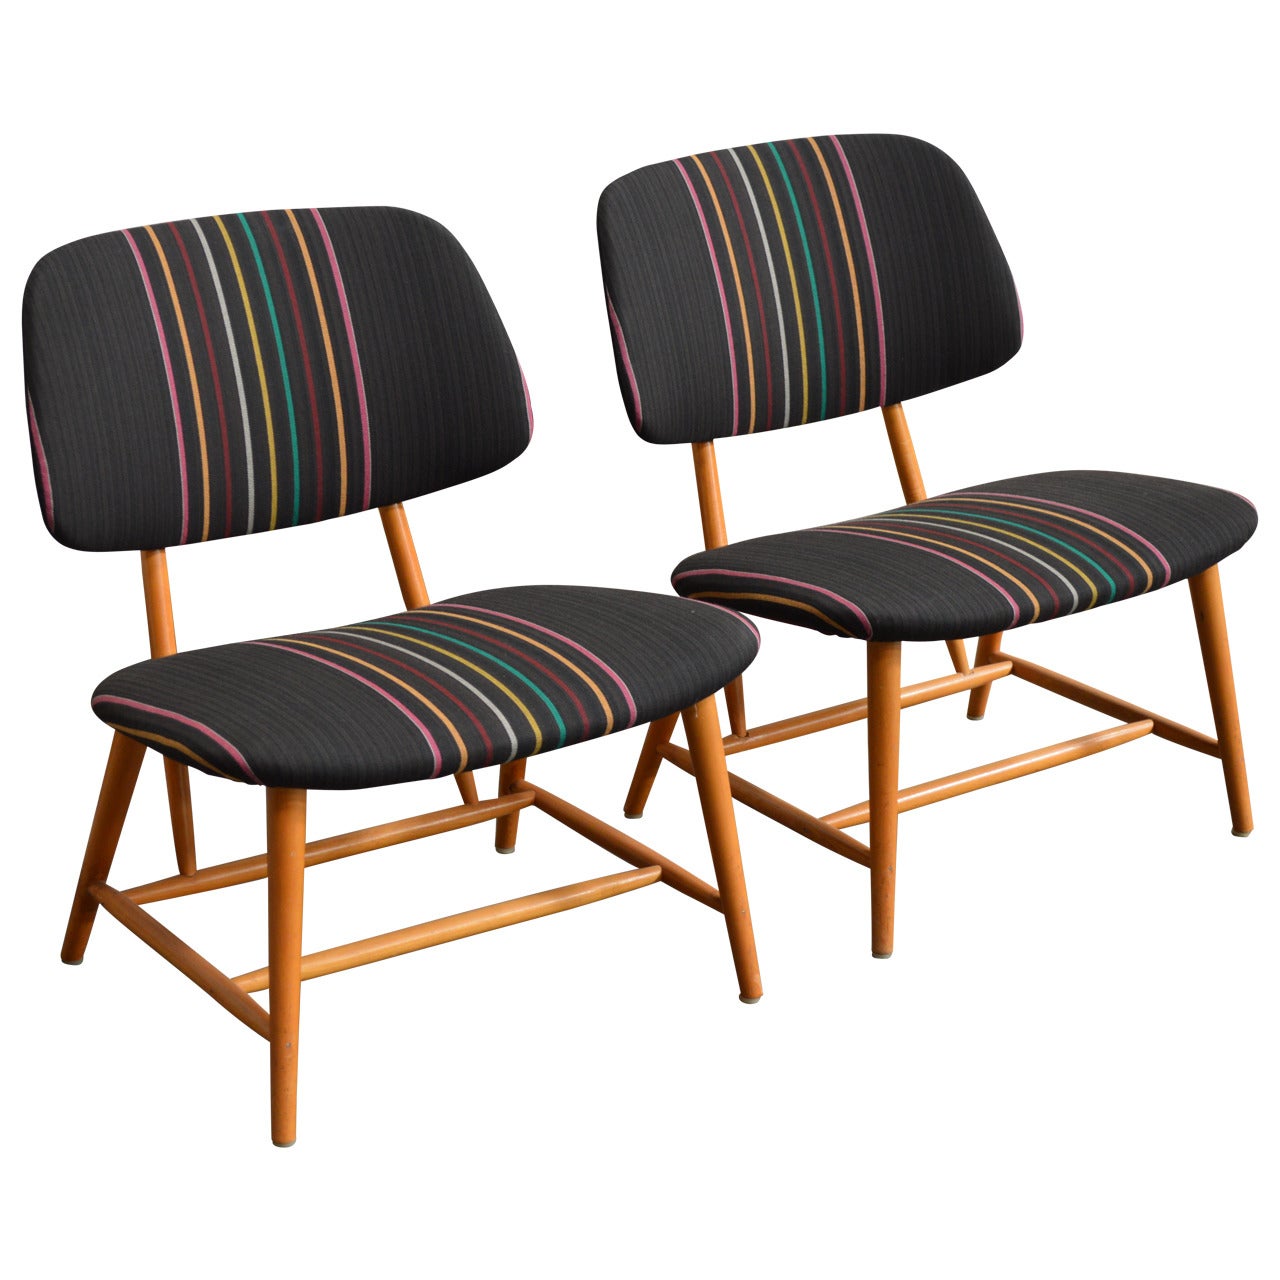 Pair of Mid-Century TV Chairs by Alf Svensson for Ljungs Industrier AB